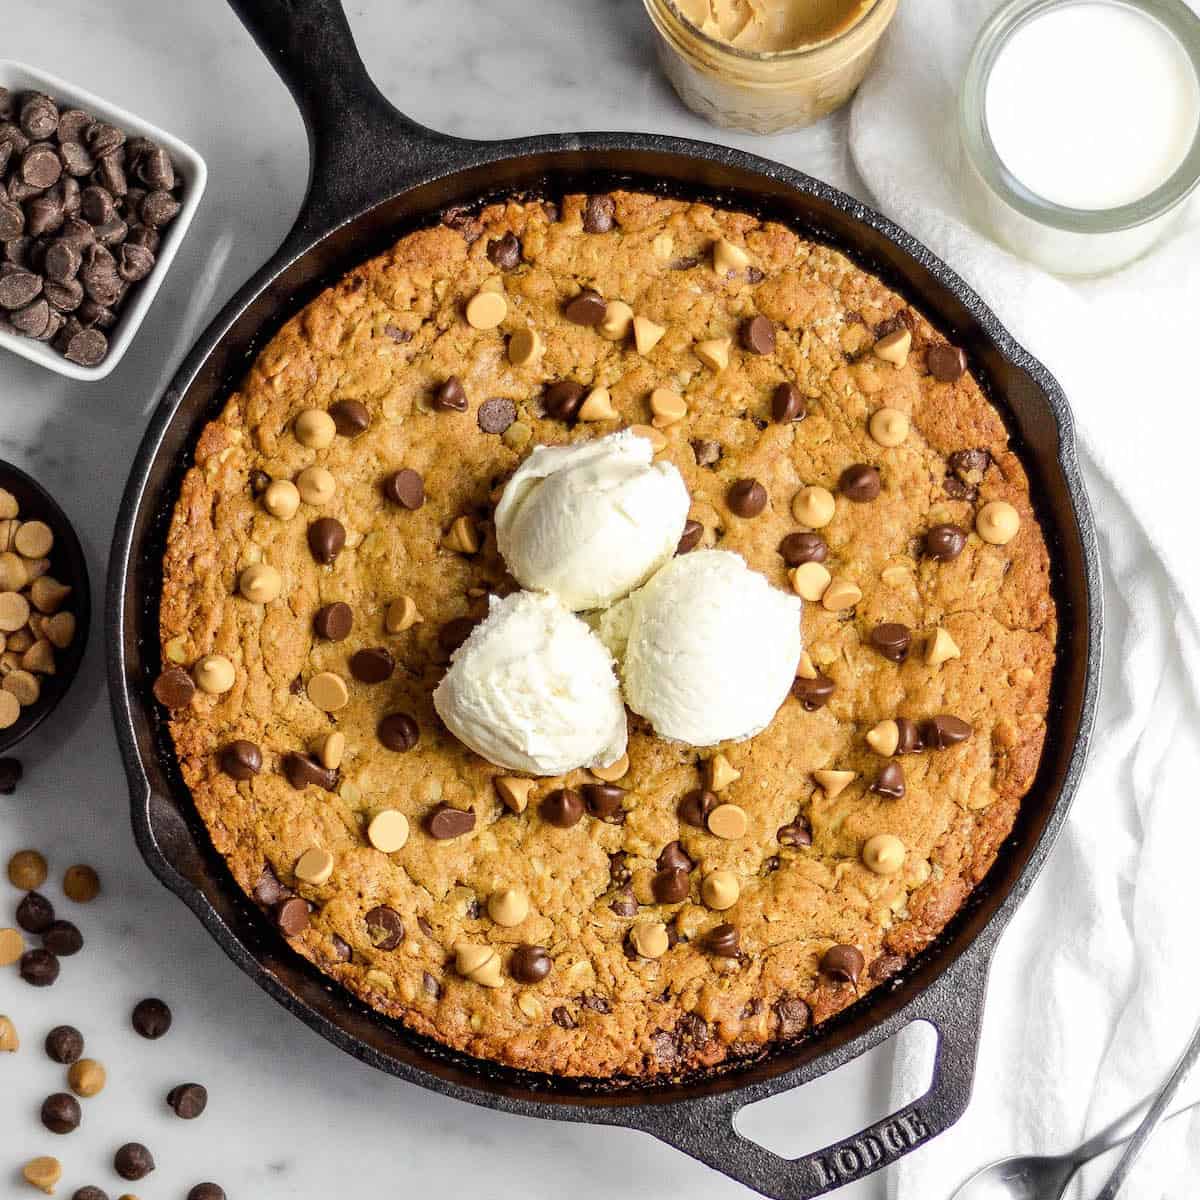 Skillet Peanut Butter Cookie in a cast iron skillet with 3 scoops of ice cream